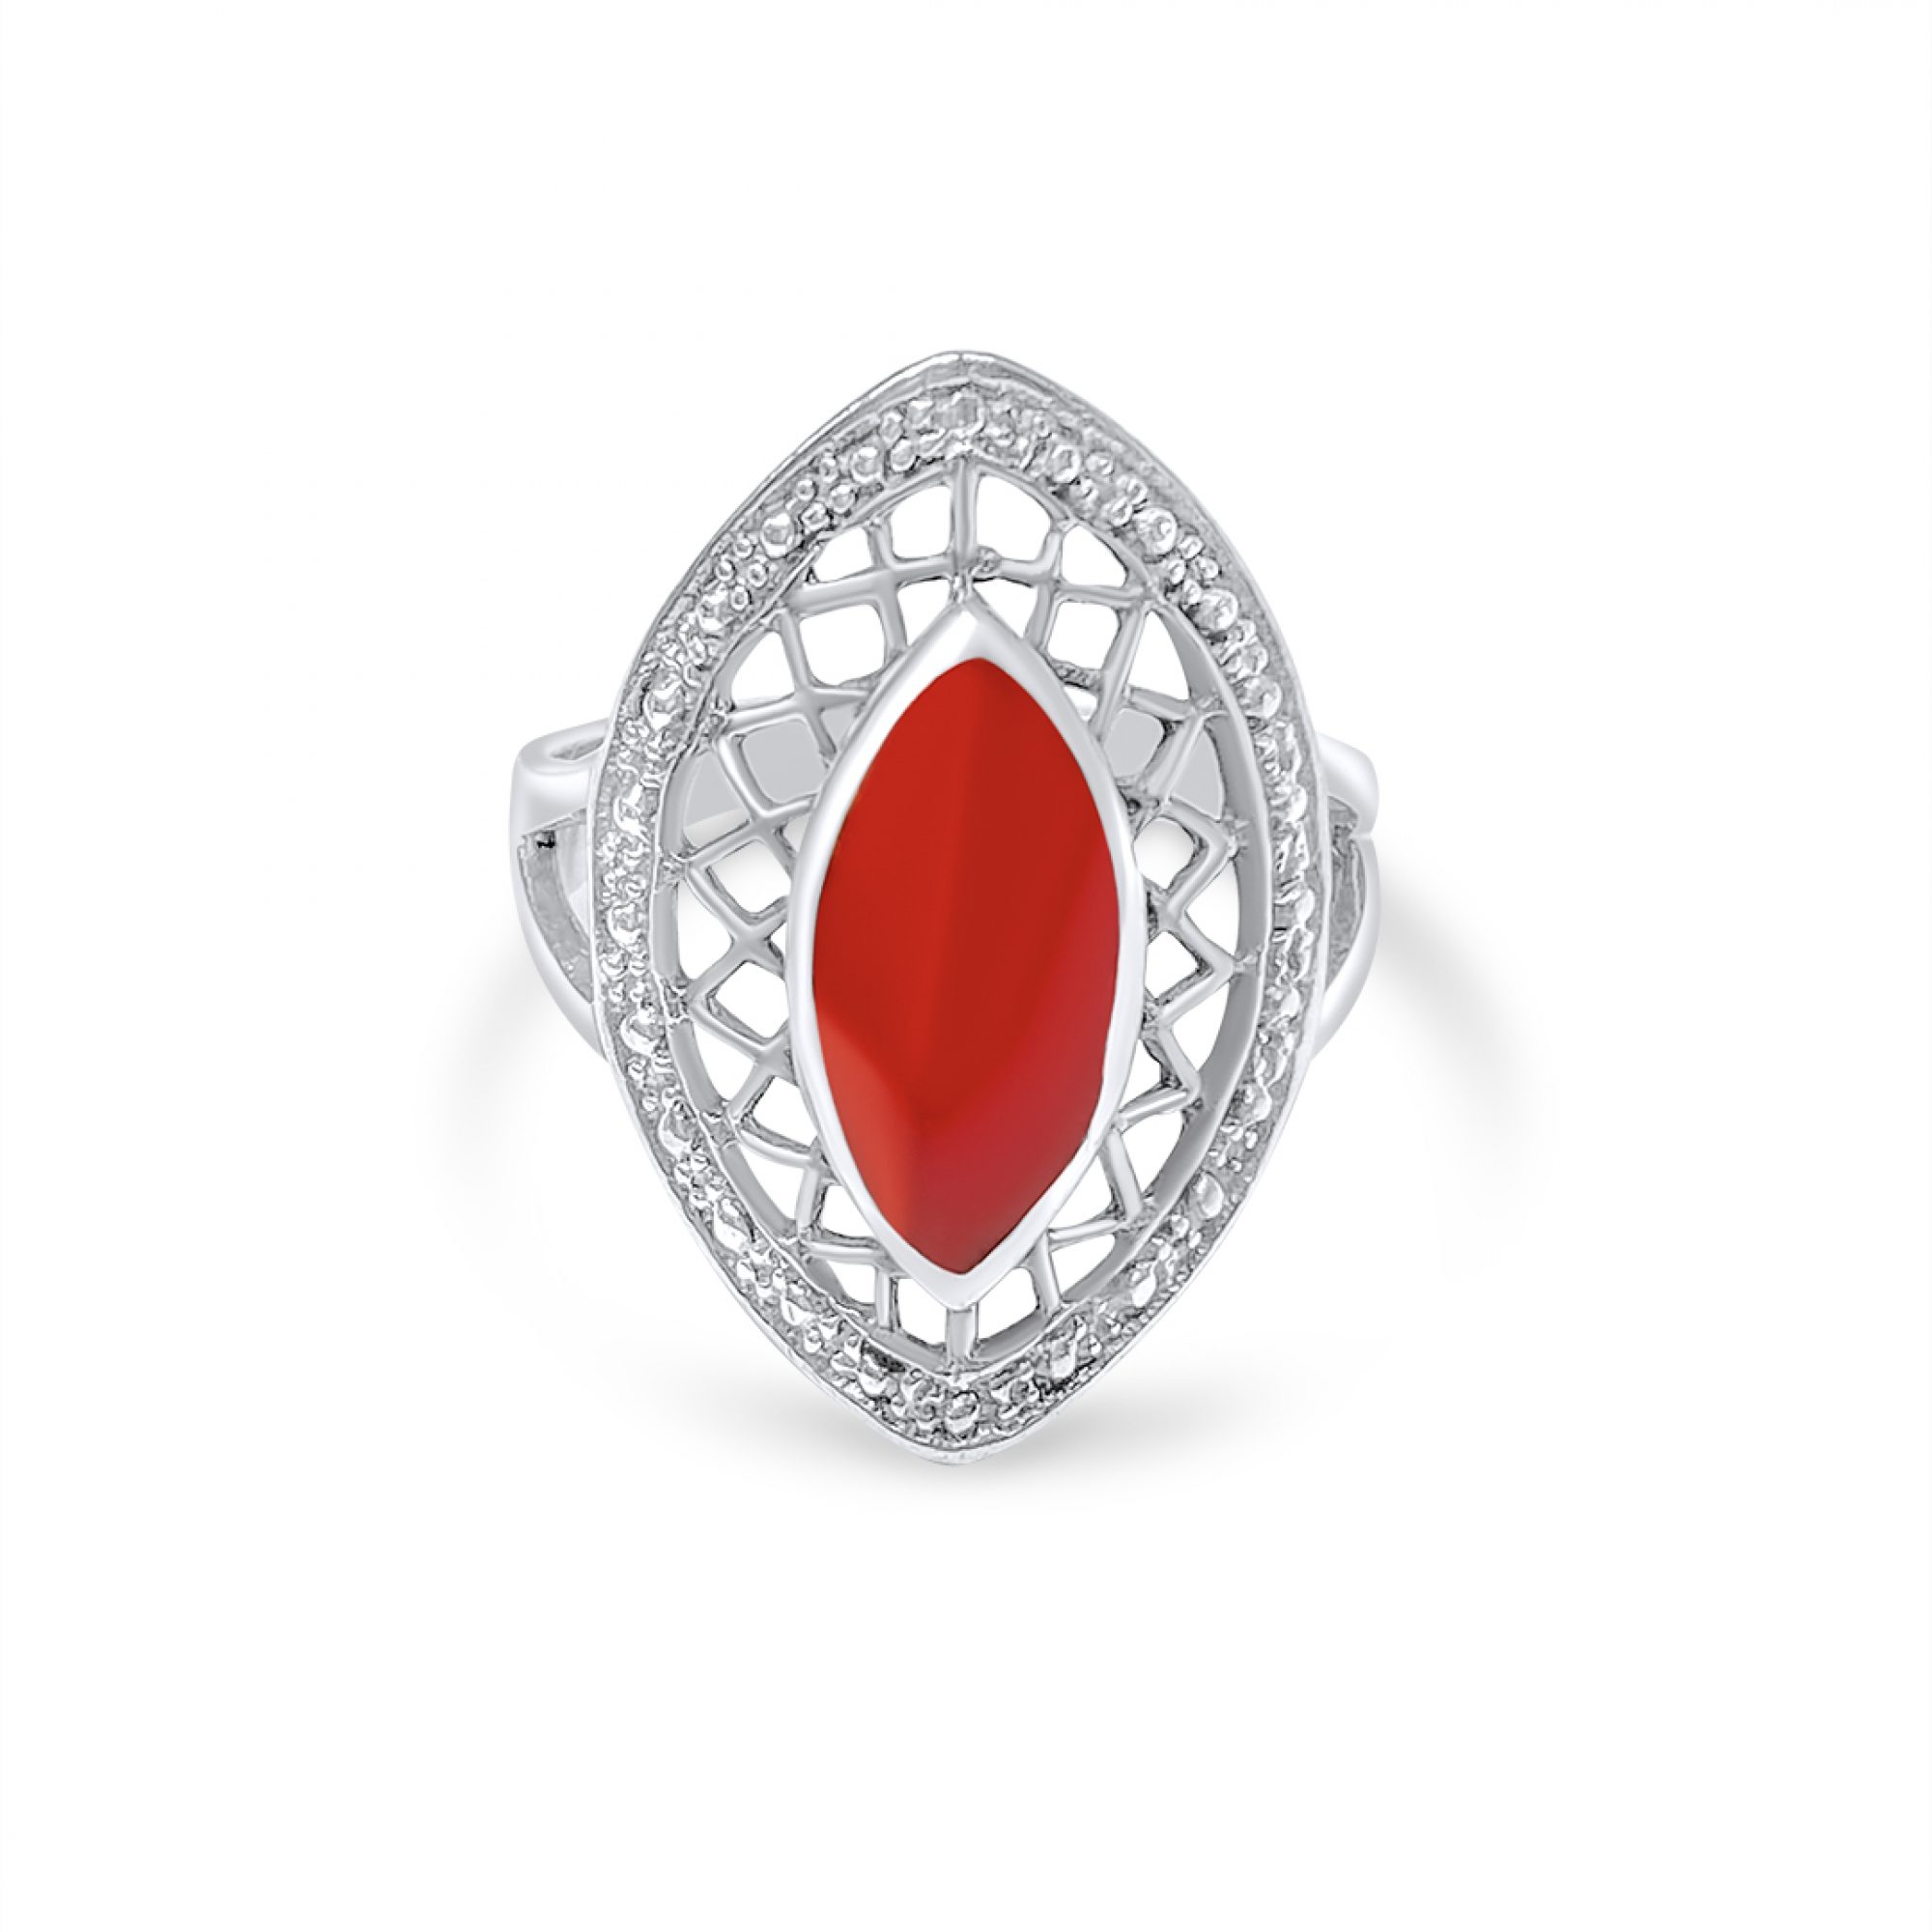 Ring with coral stone